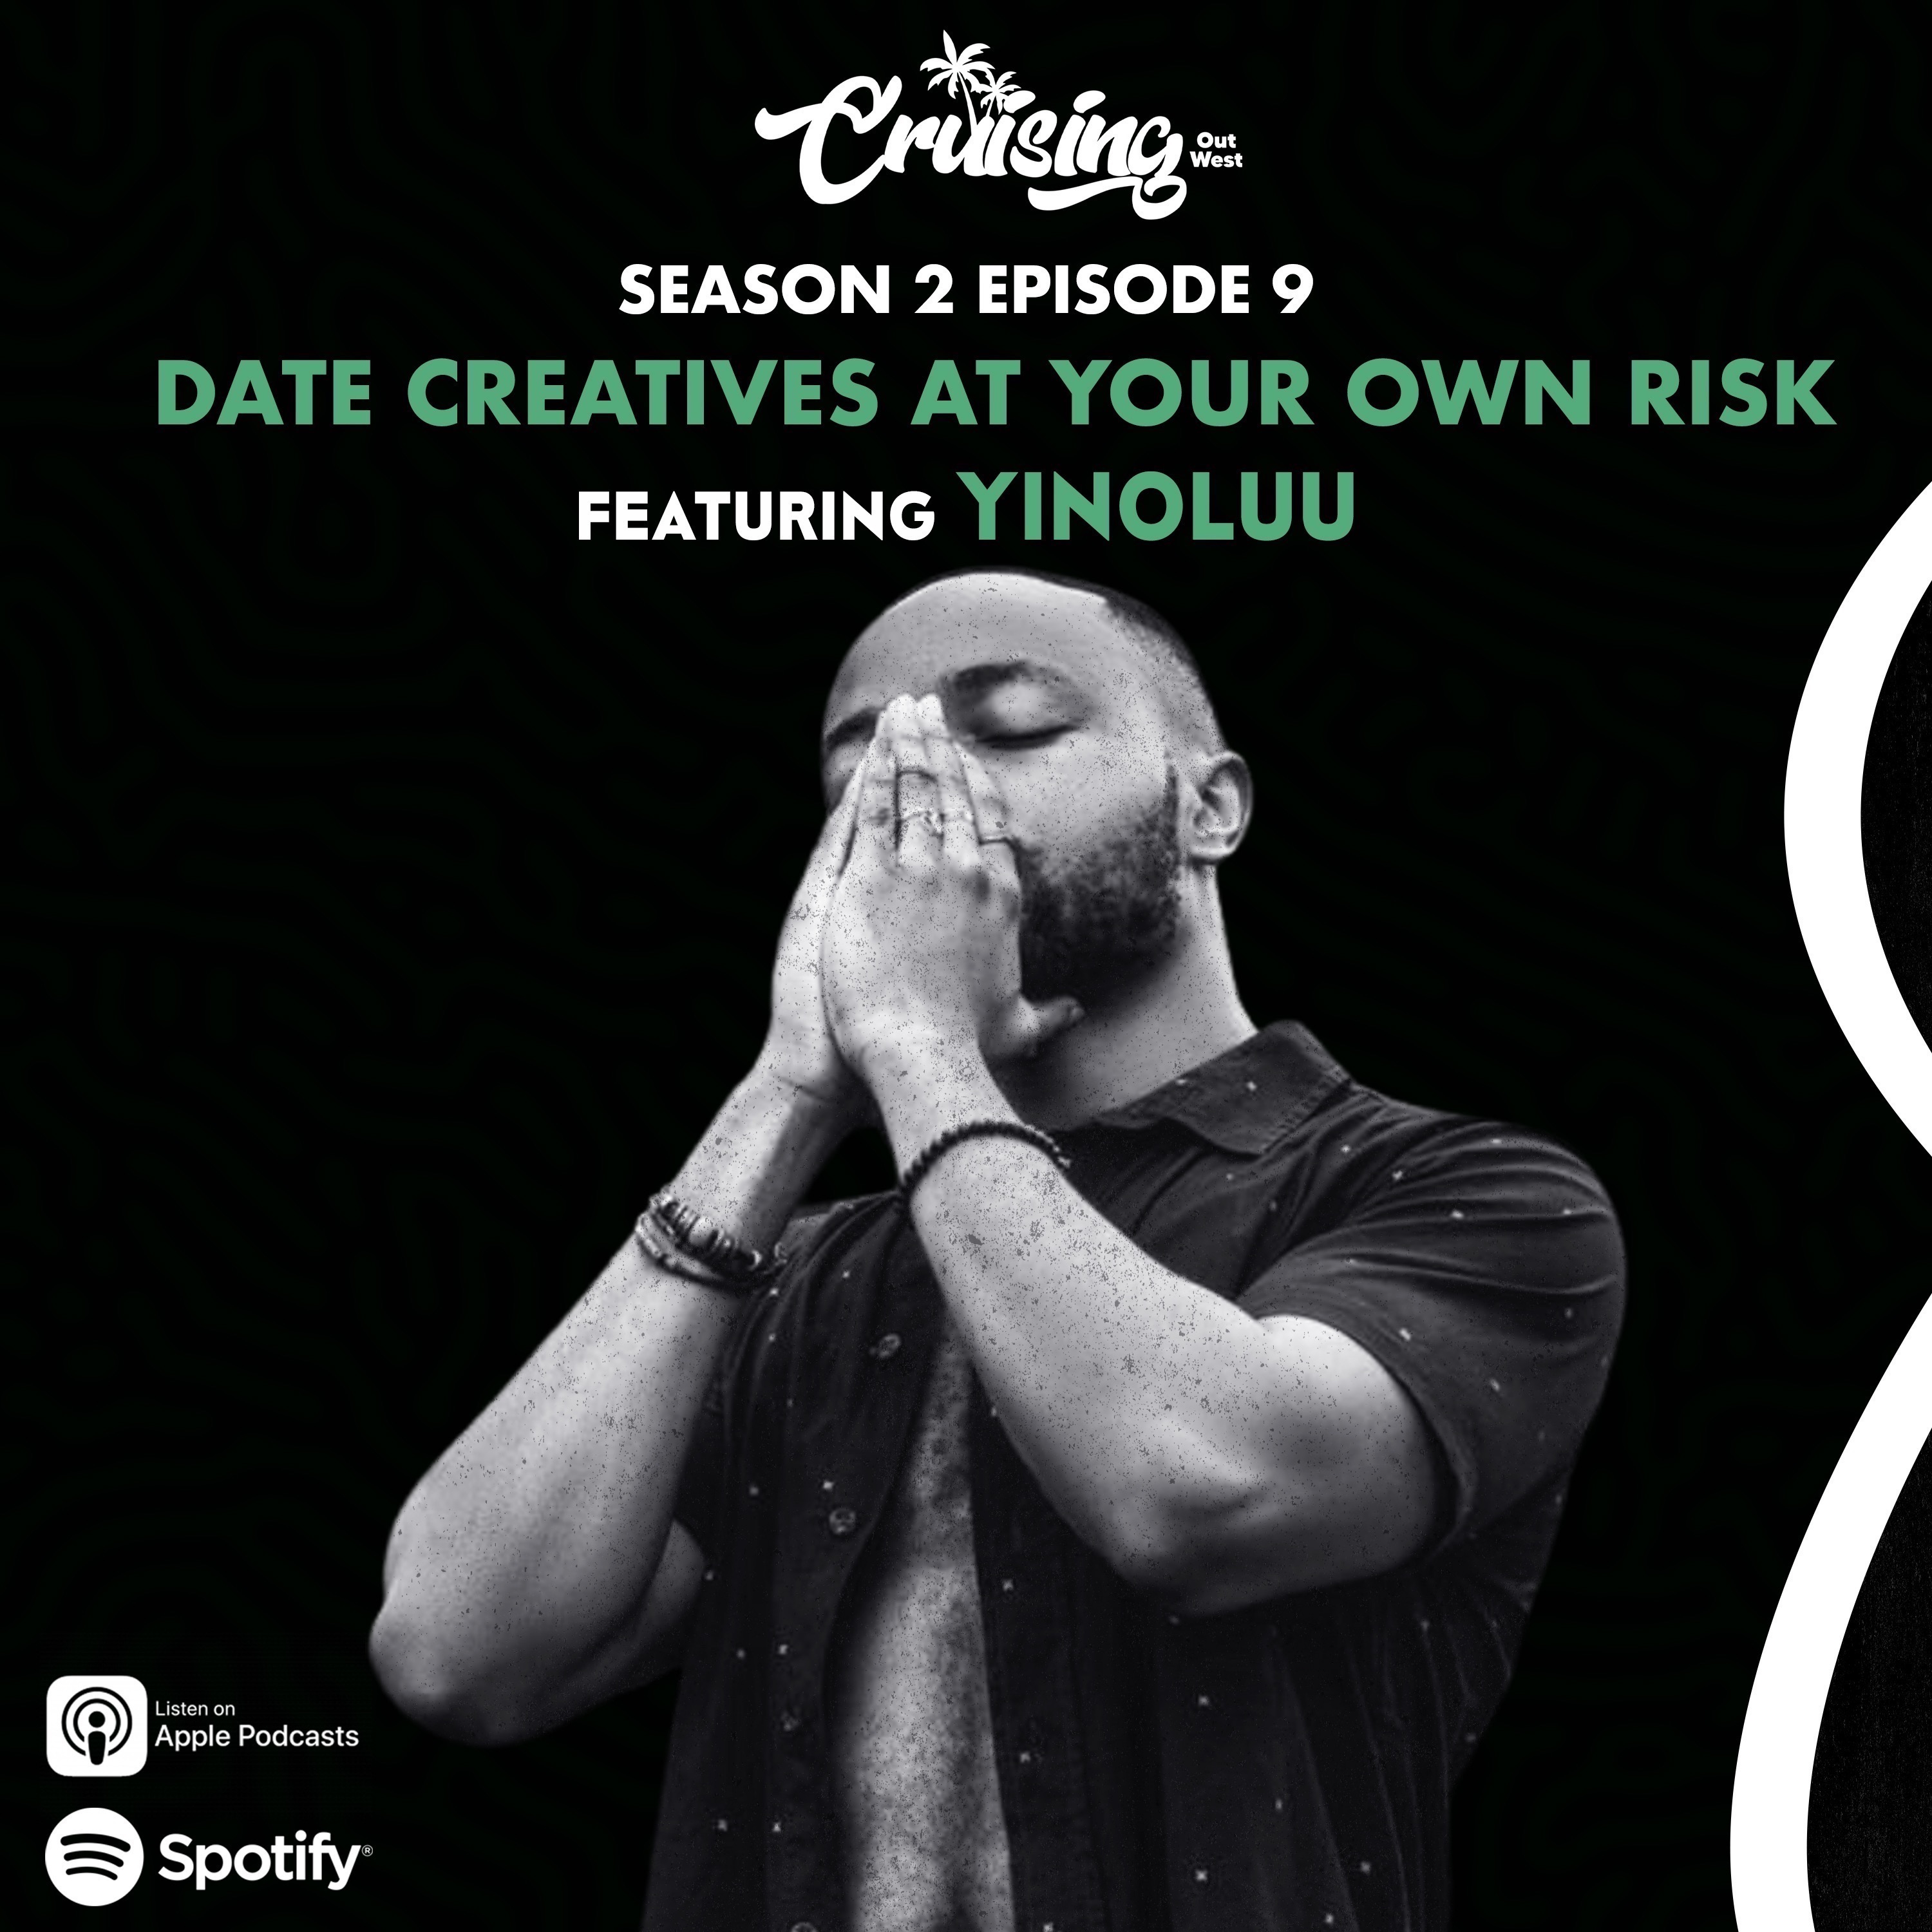 S2E9: “Date Creatives At Your Own Risk” ft. Yinoluu